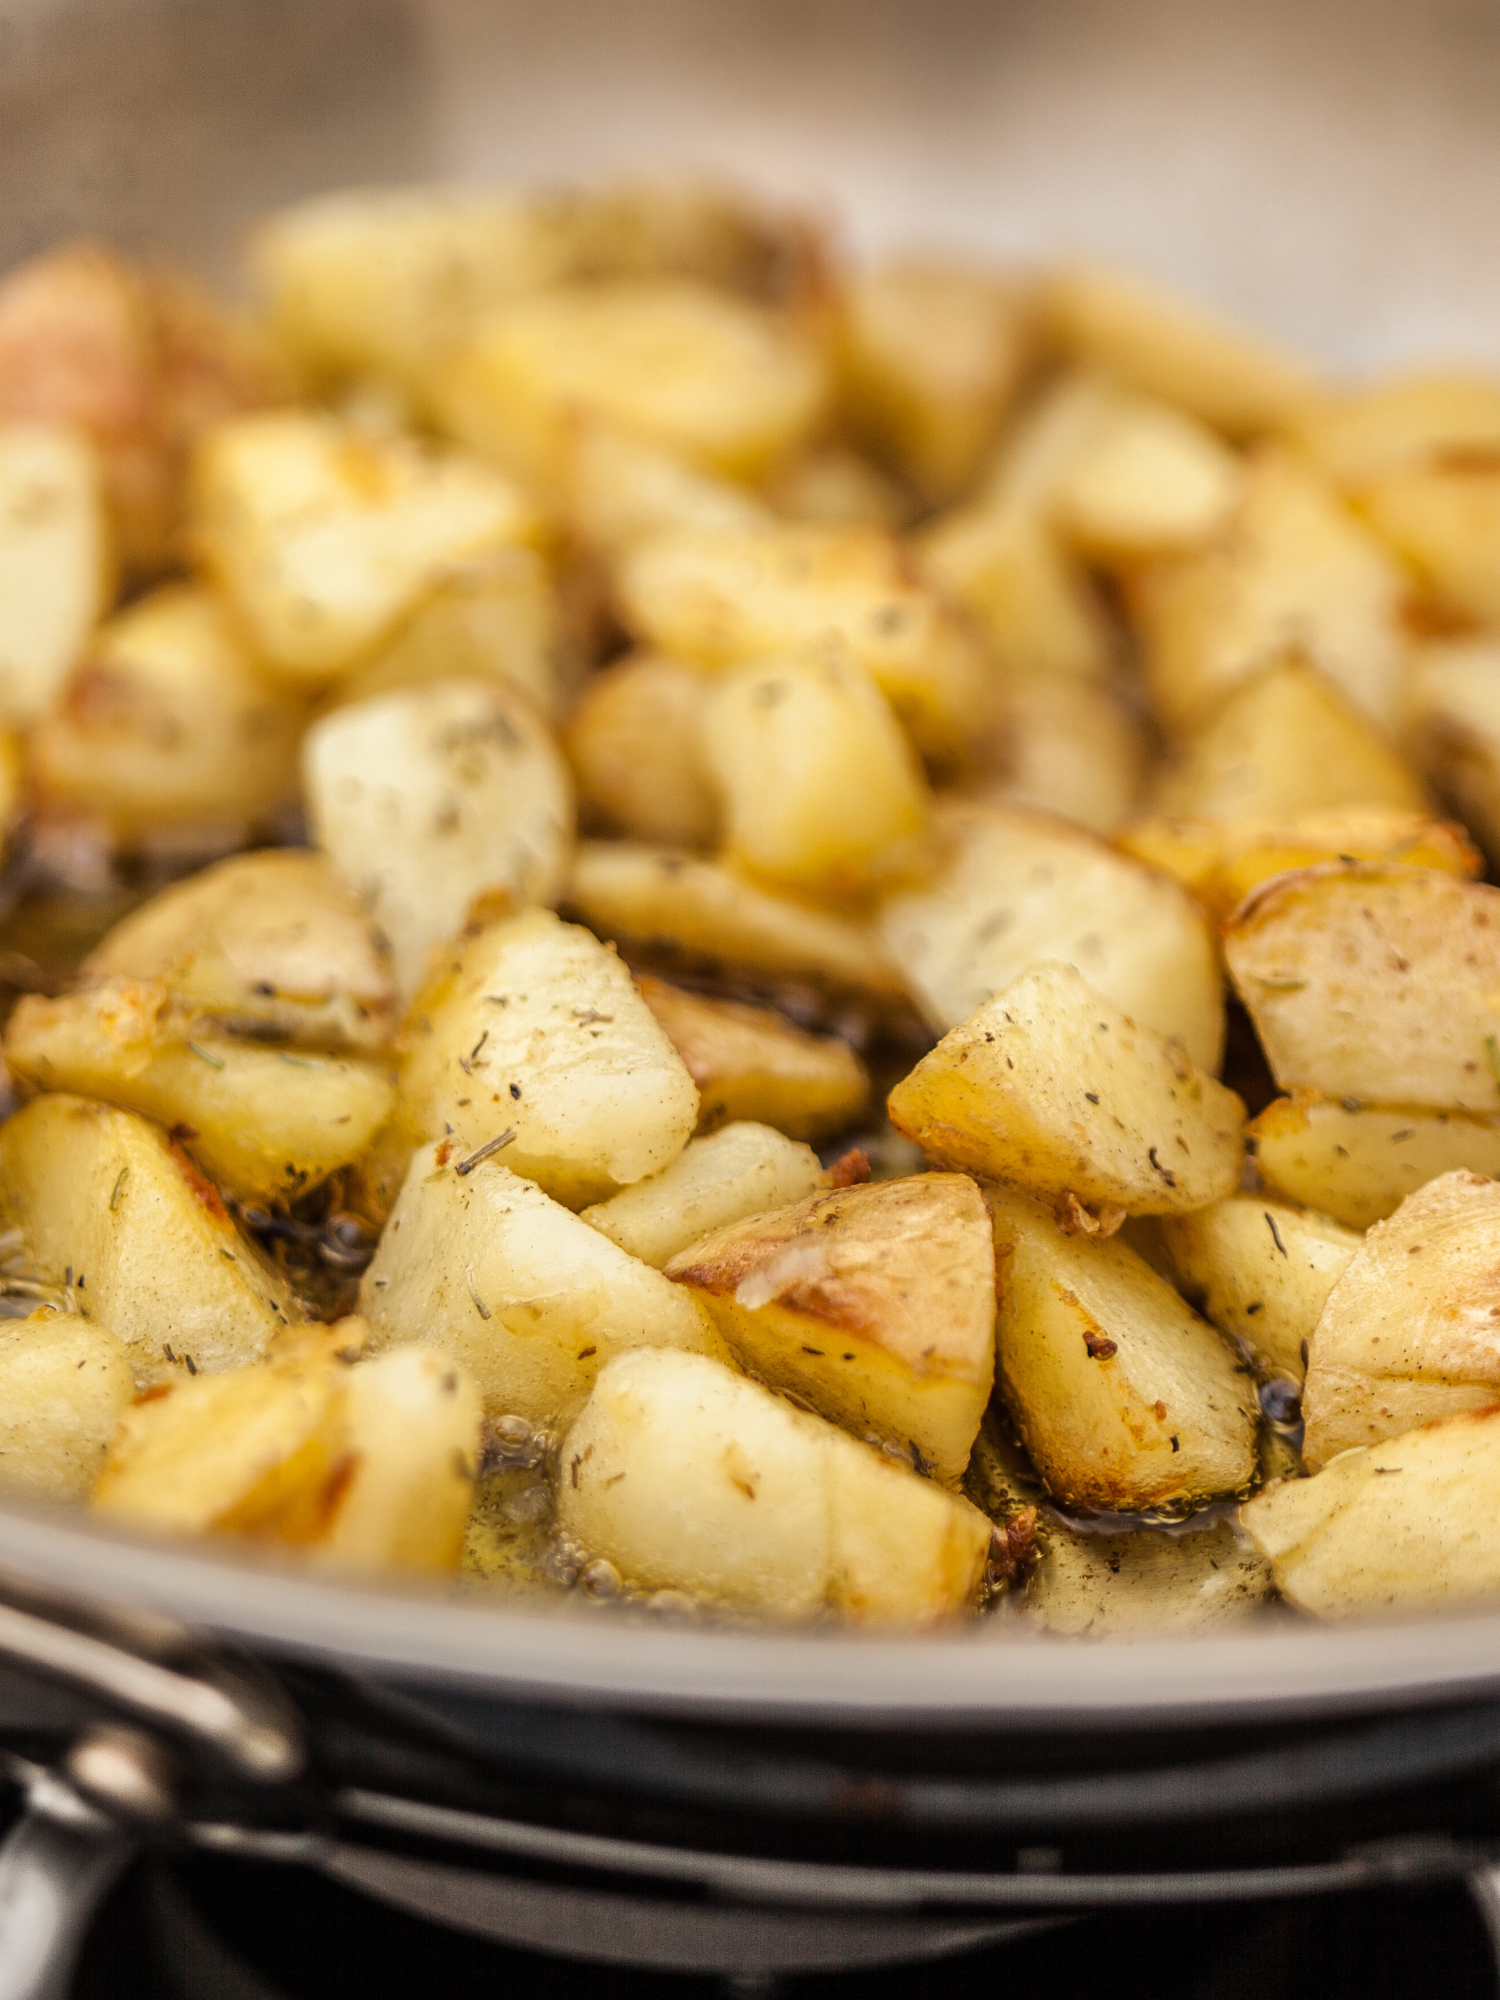 turkish potatoes frying in a skillet